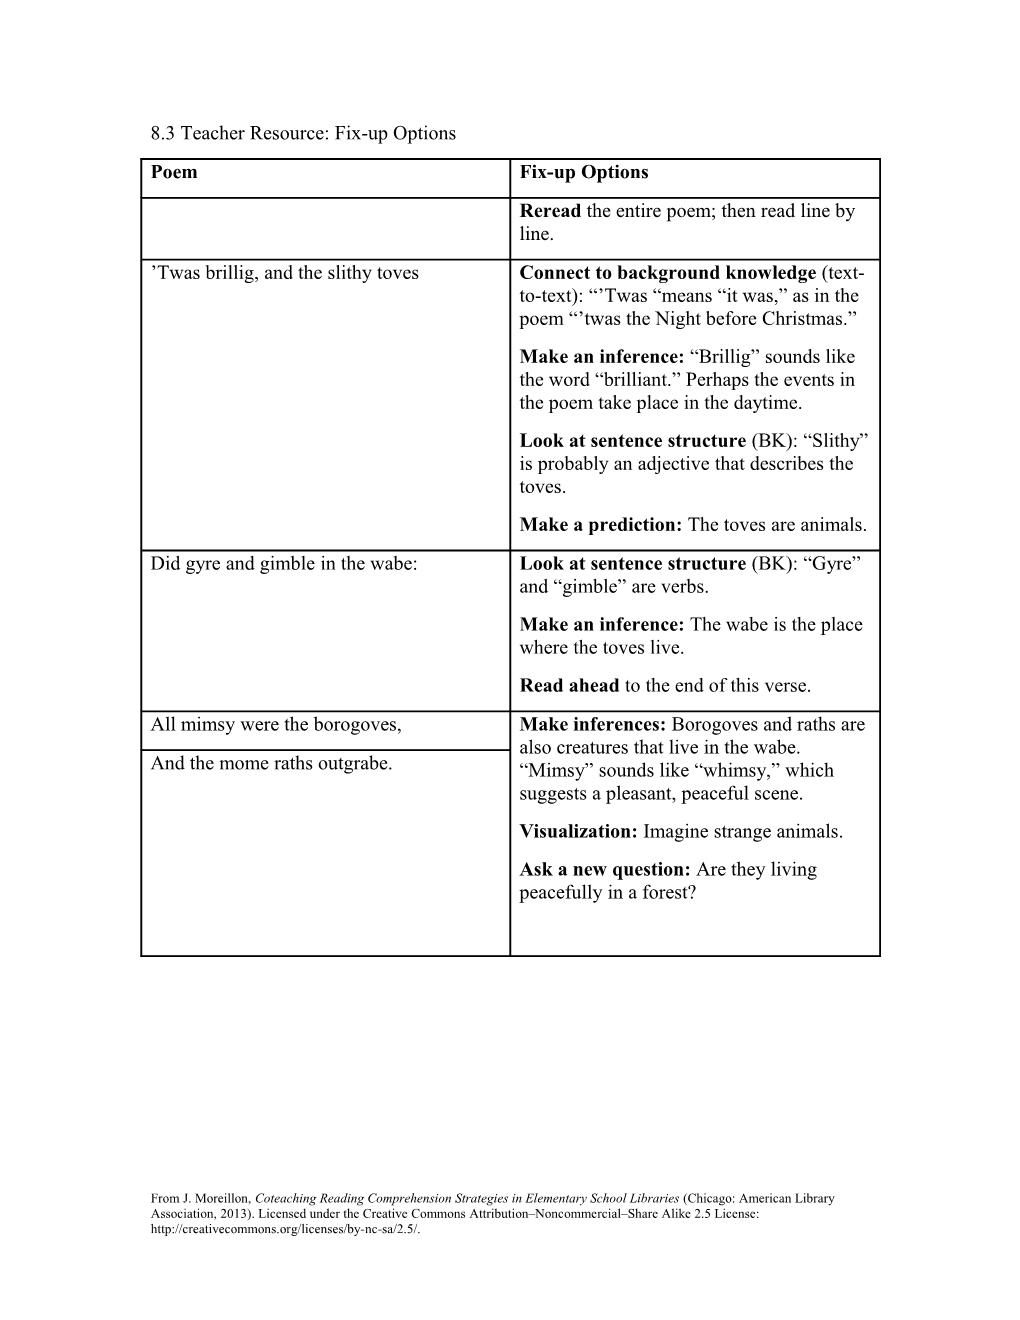 From J. Moreillon, Coteaching Reading Comprehension Strategies in Elementary School Libraries